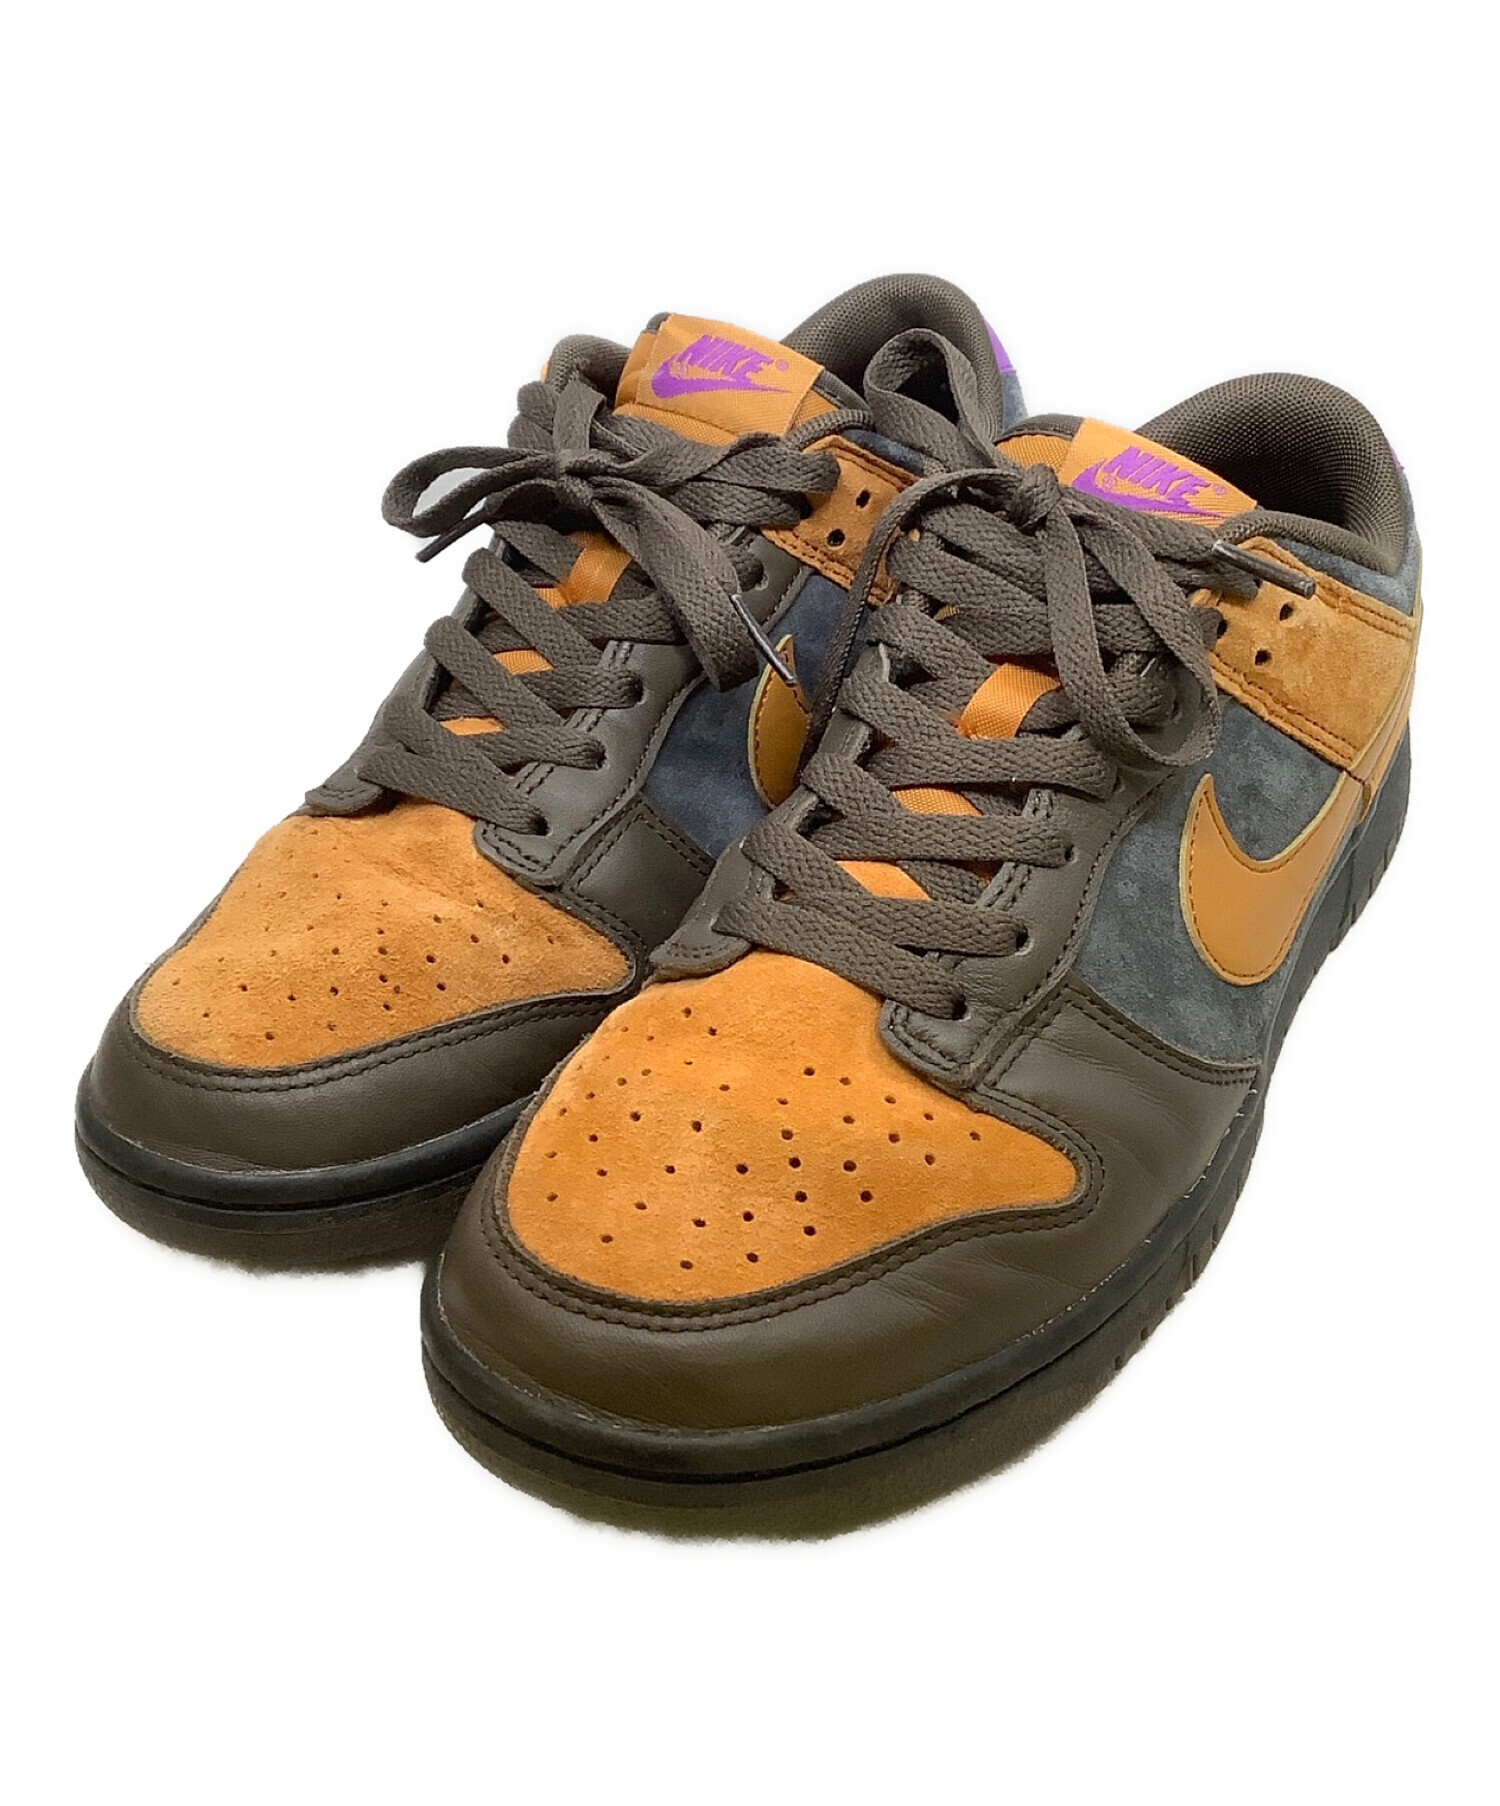 Nike ダンク low  Cider 27